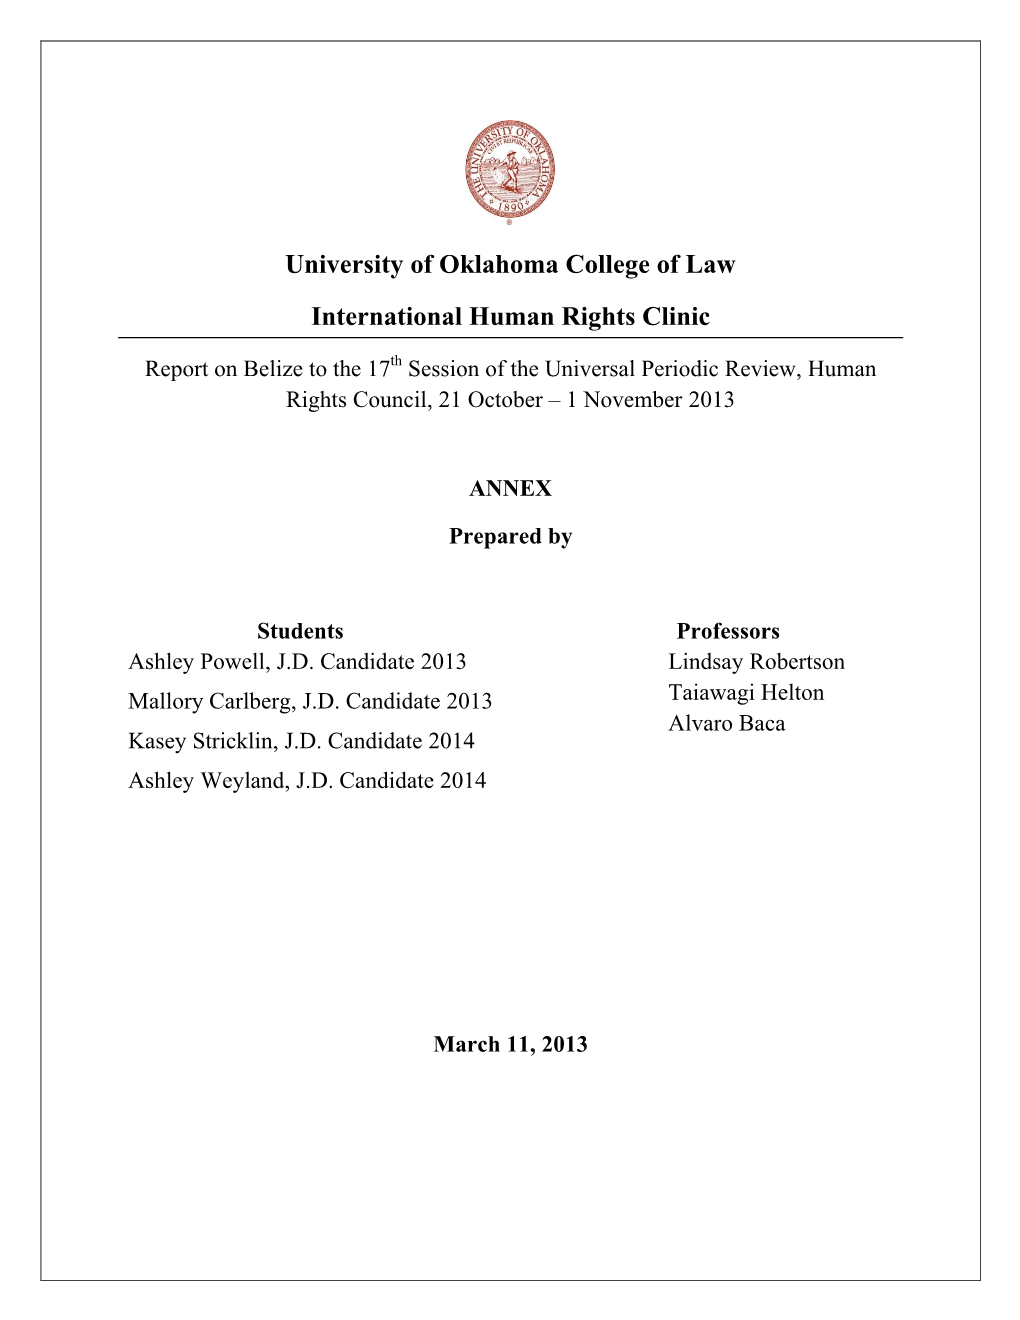 University of Oklahoma College of Law International Human Rights Clinic